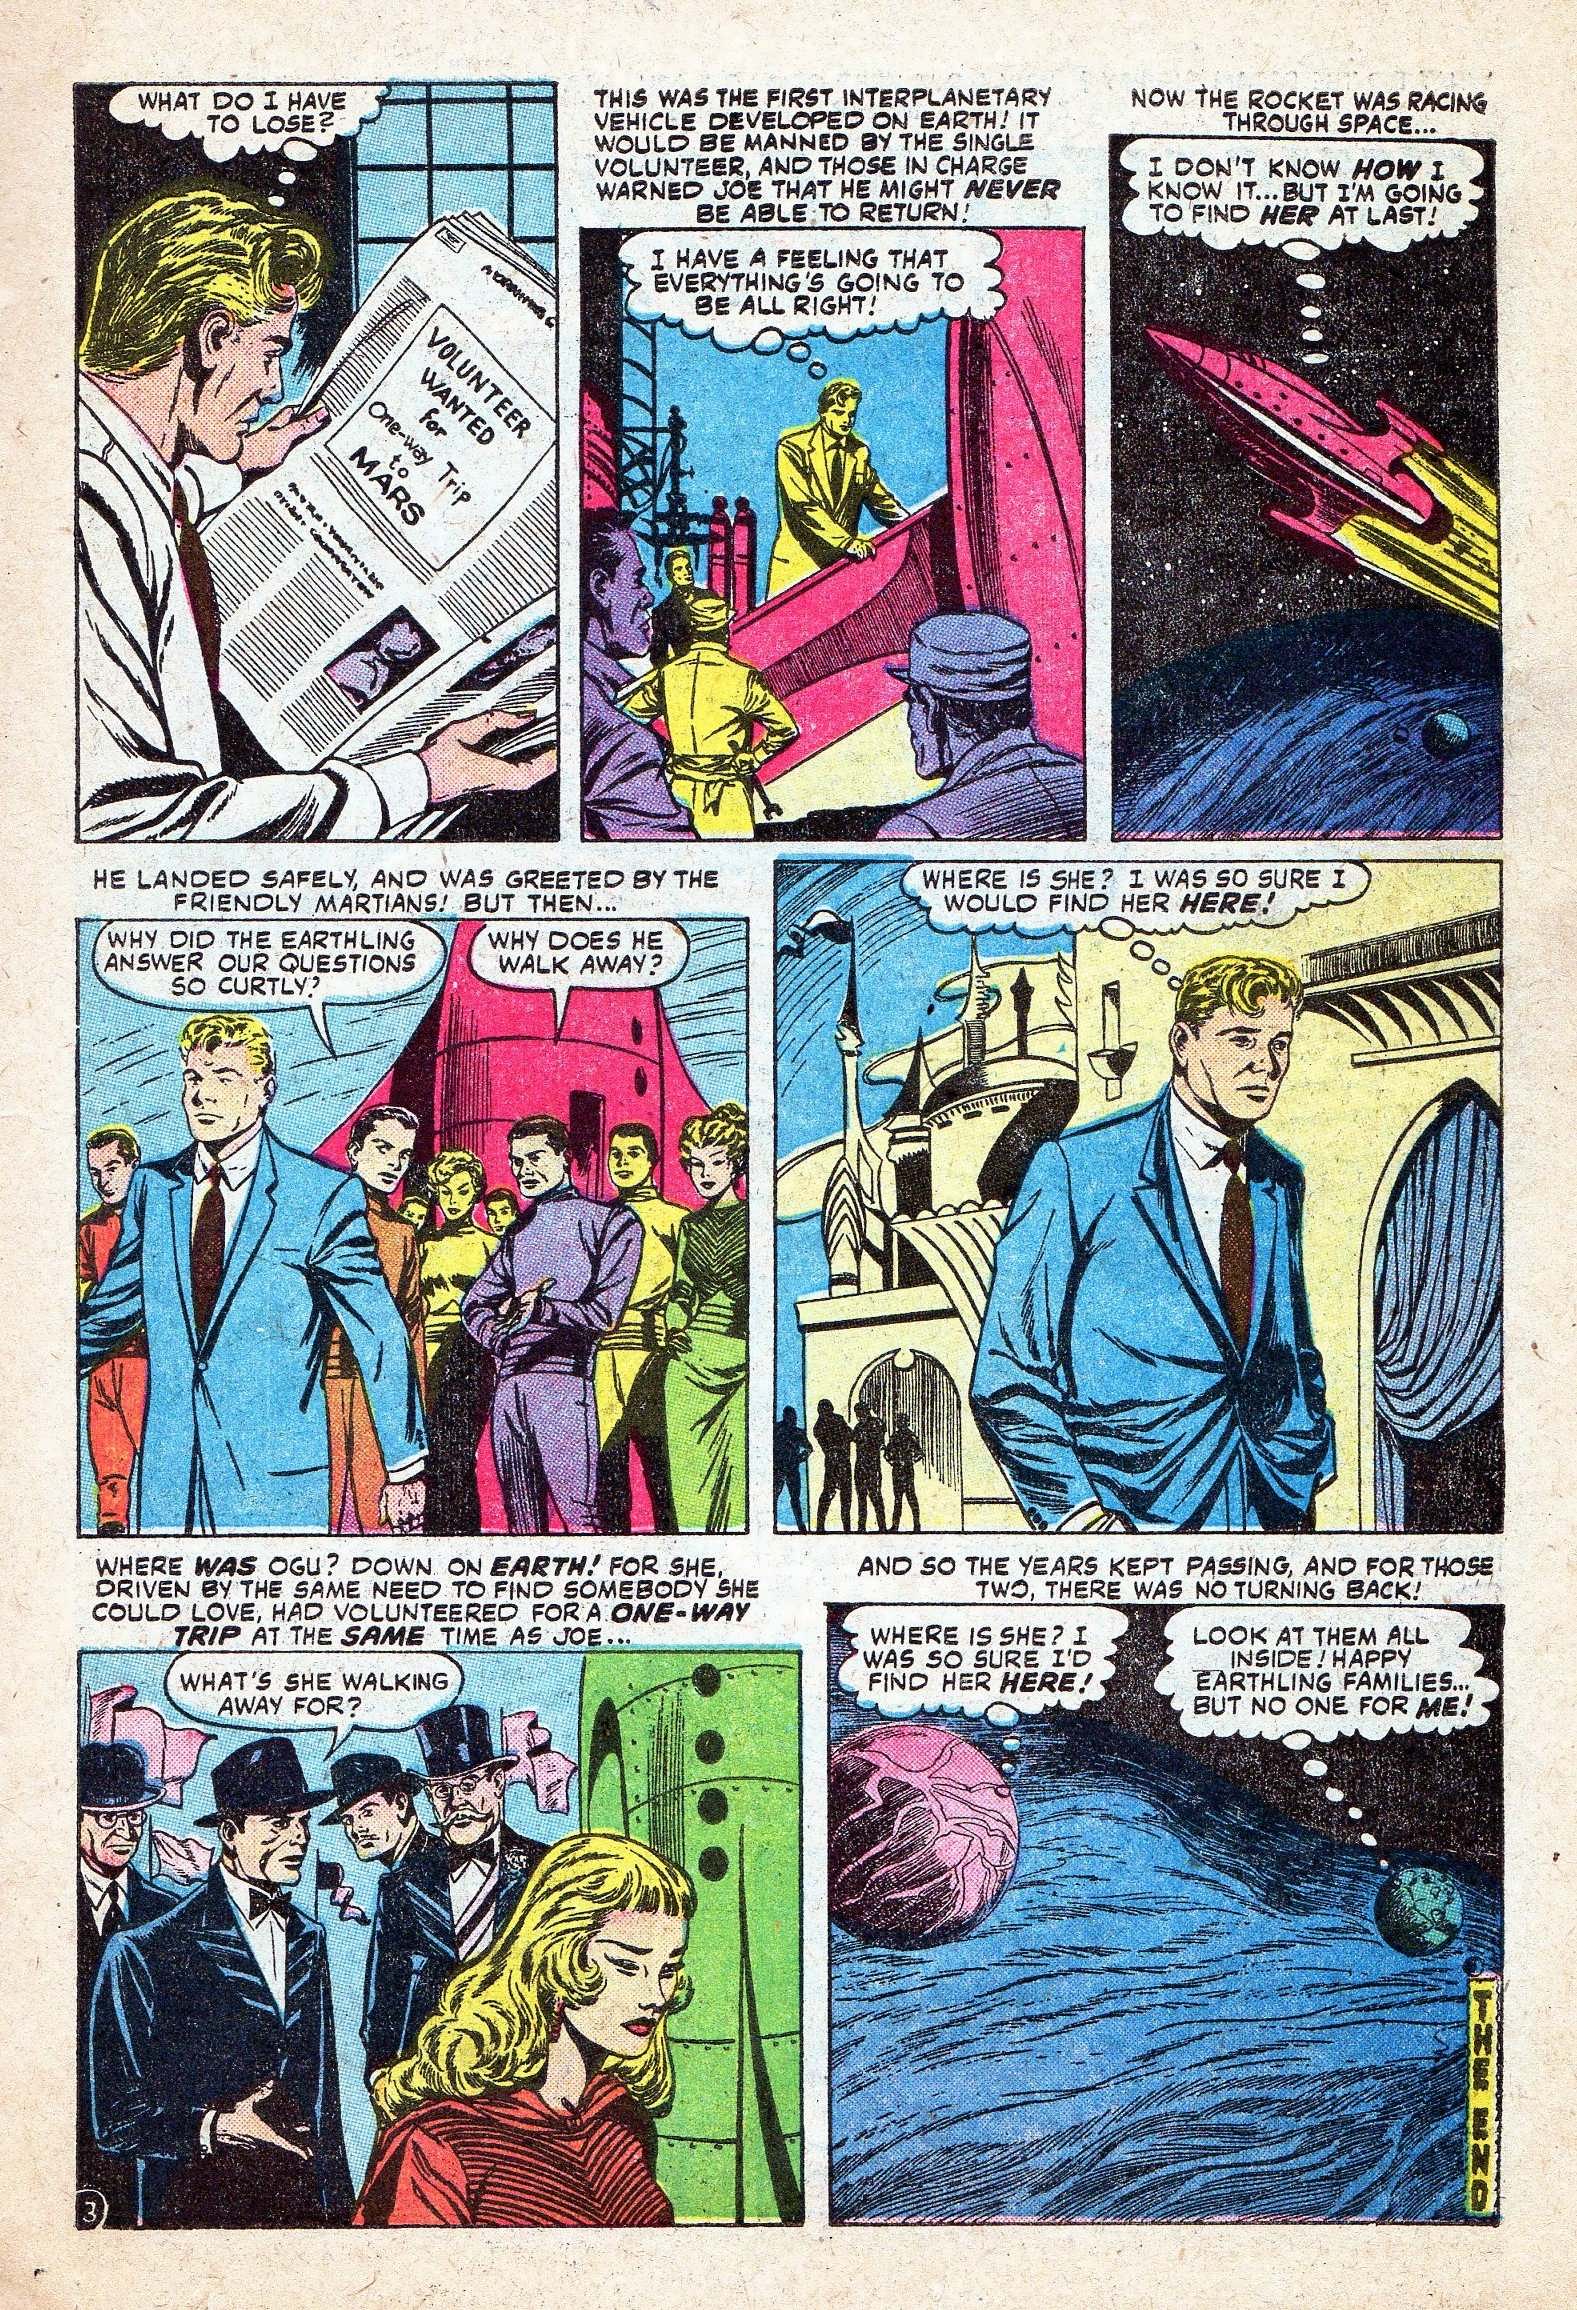 Marvel Tales (1949) 145 Page 14